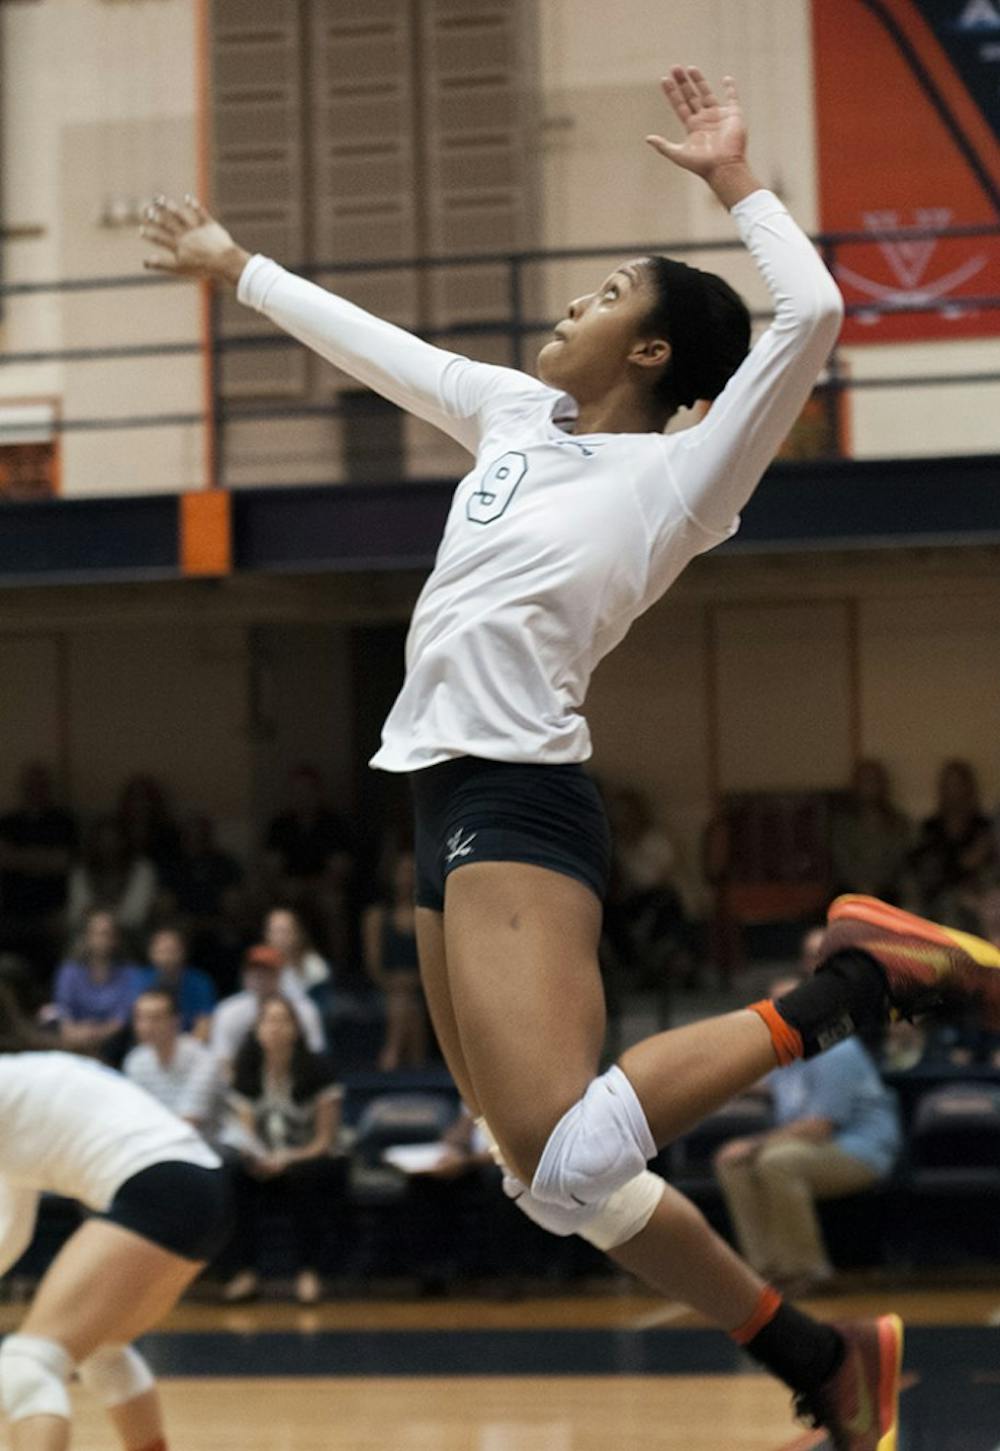 <p>Senior outside hitter Jasmine Burton led the Cavaliers with 12 kills in their win over Clemson, snapping a 12-game losing streak.&nbsp;</p>